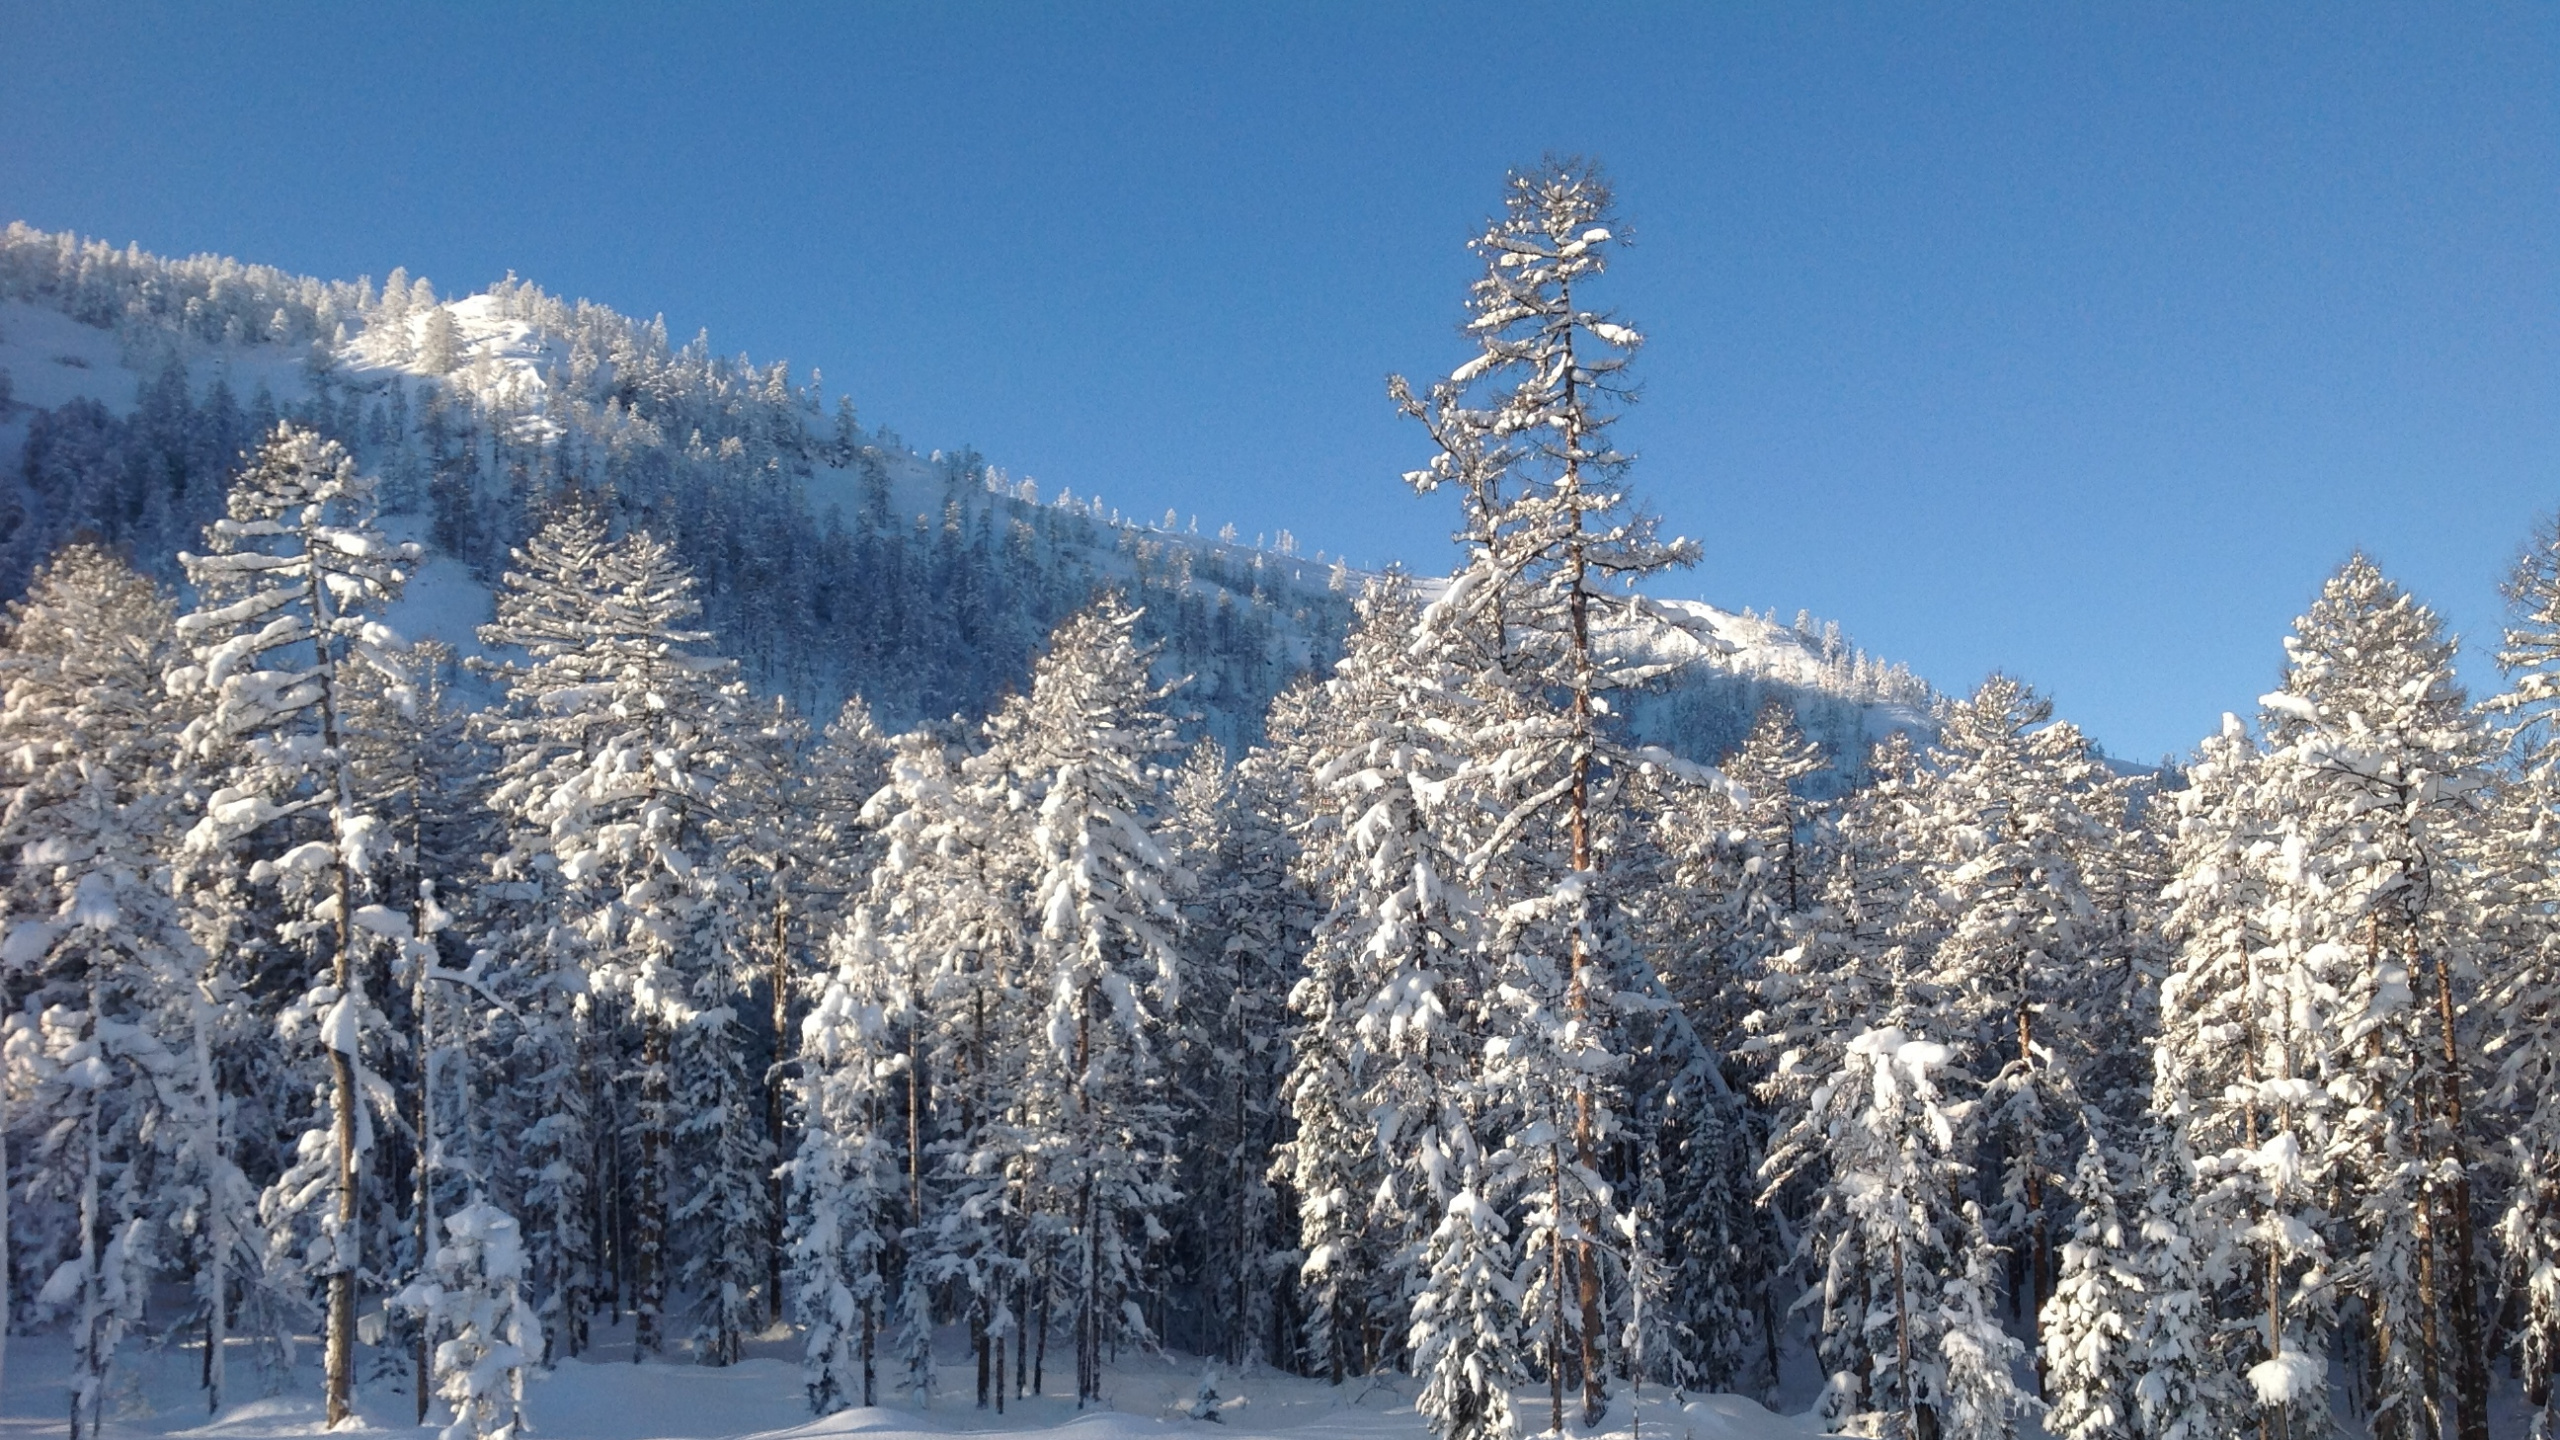 Snow Covered Pine Trees Under Blue Sky During Daytime. Wallpaper in 2560x1440 Resolution